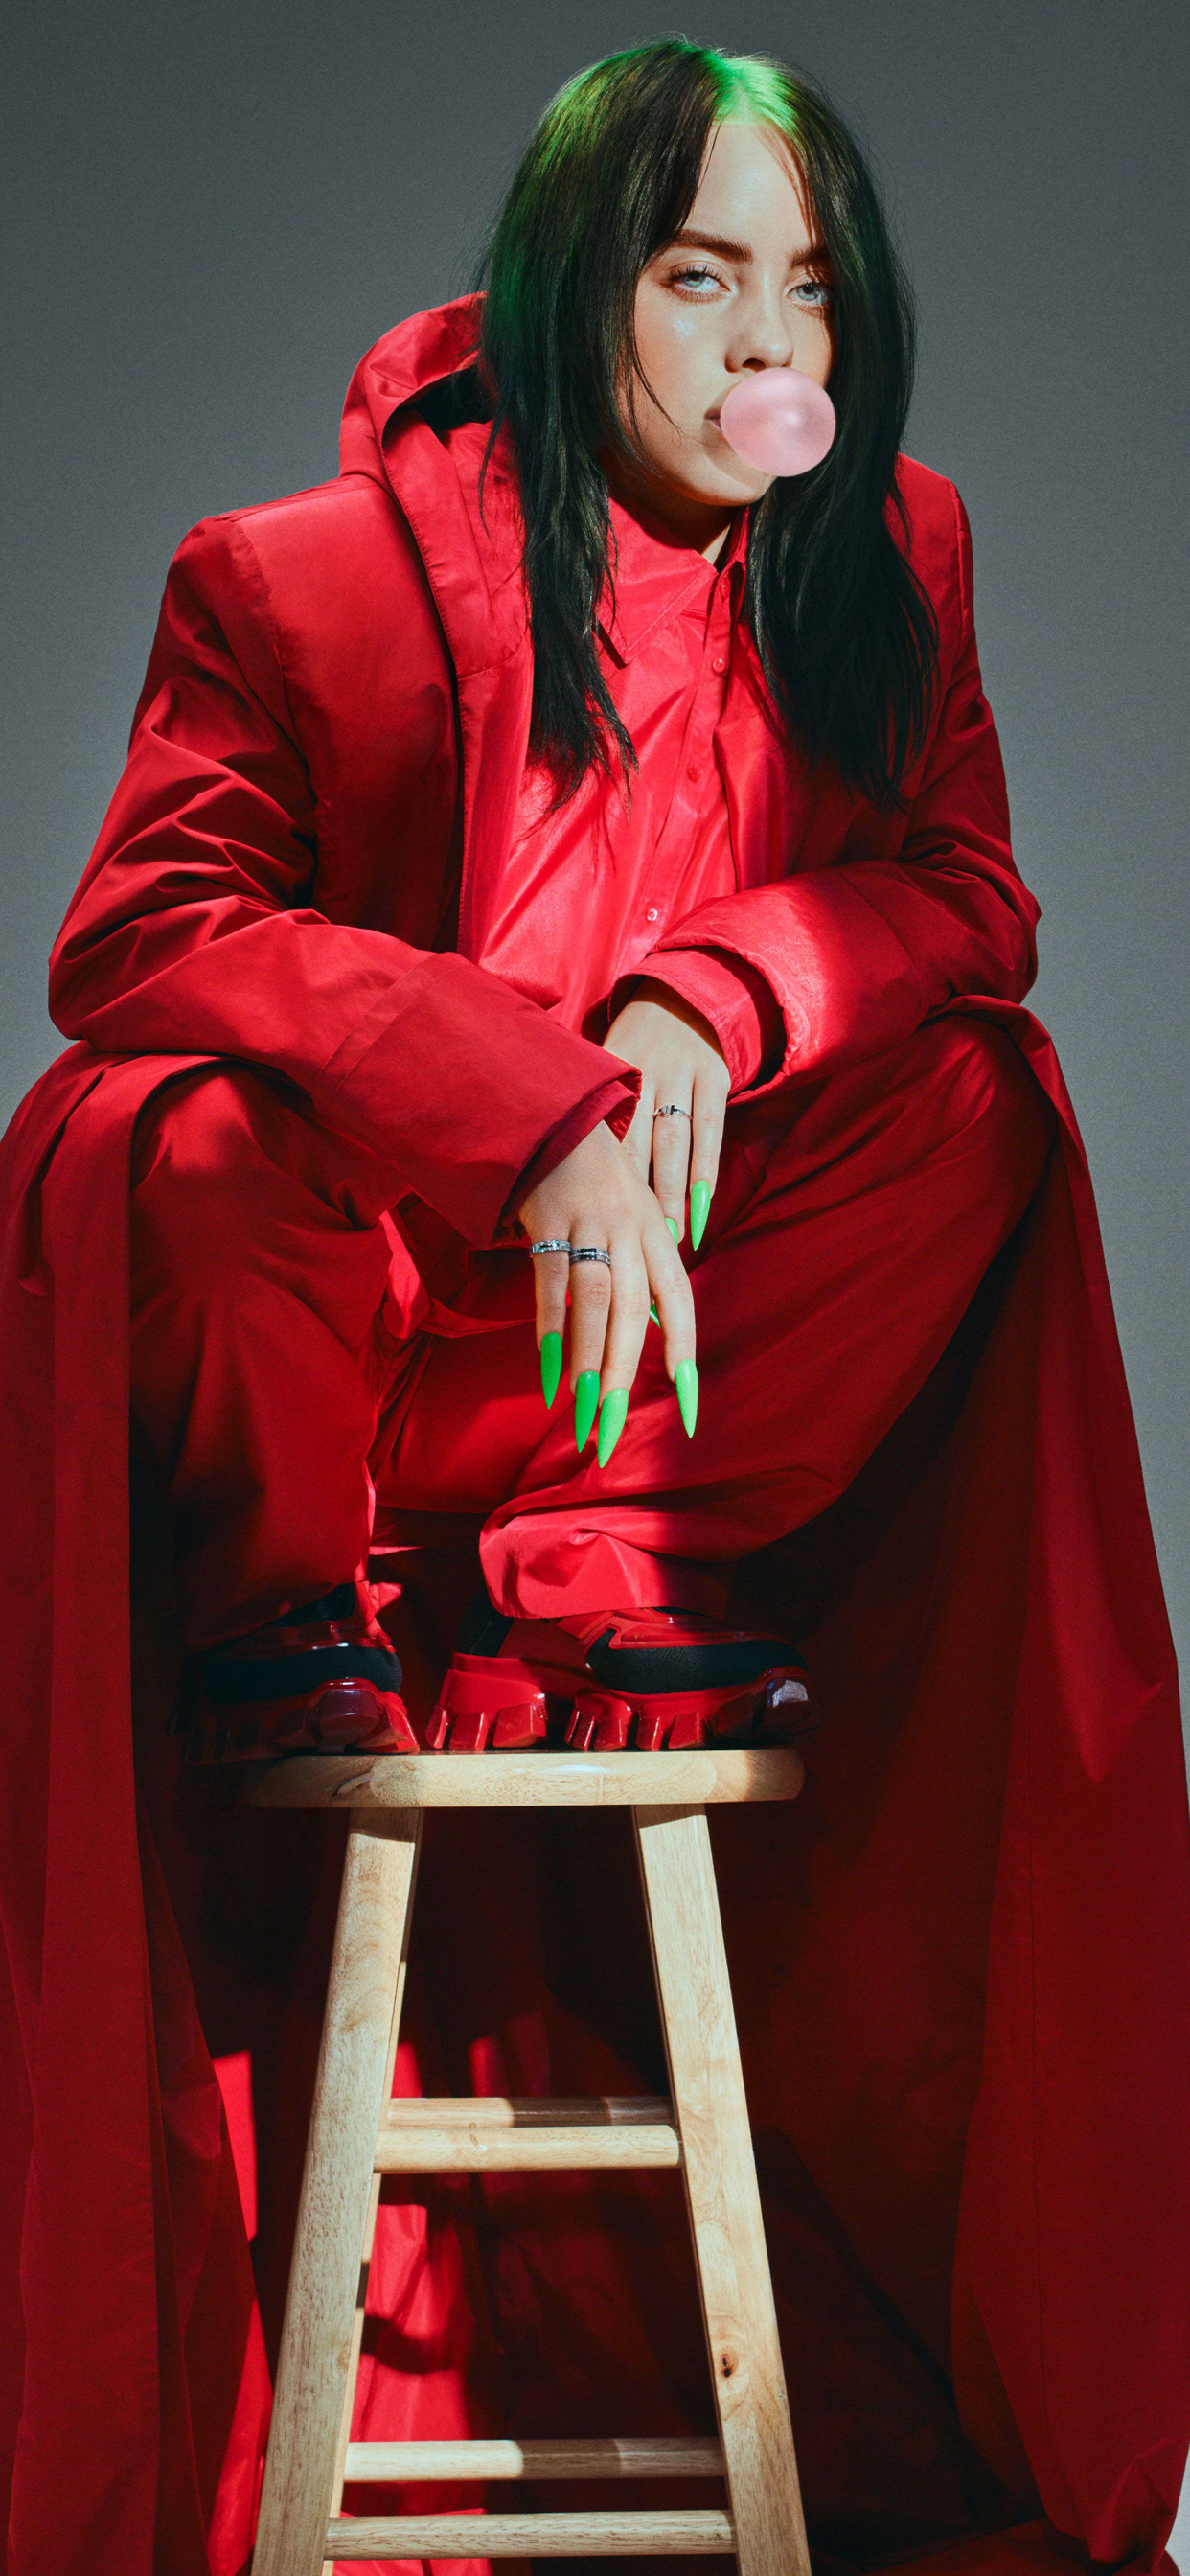 1242x2688 Billie Eilish 2020 Iphone Xs Max Wallpaper Hd Celebrities 4k Wallpapers Images Photos And Background